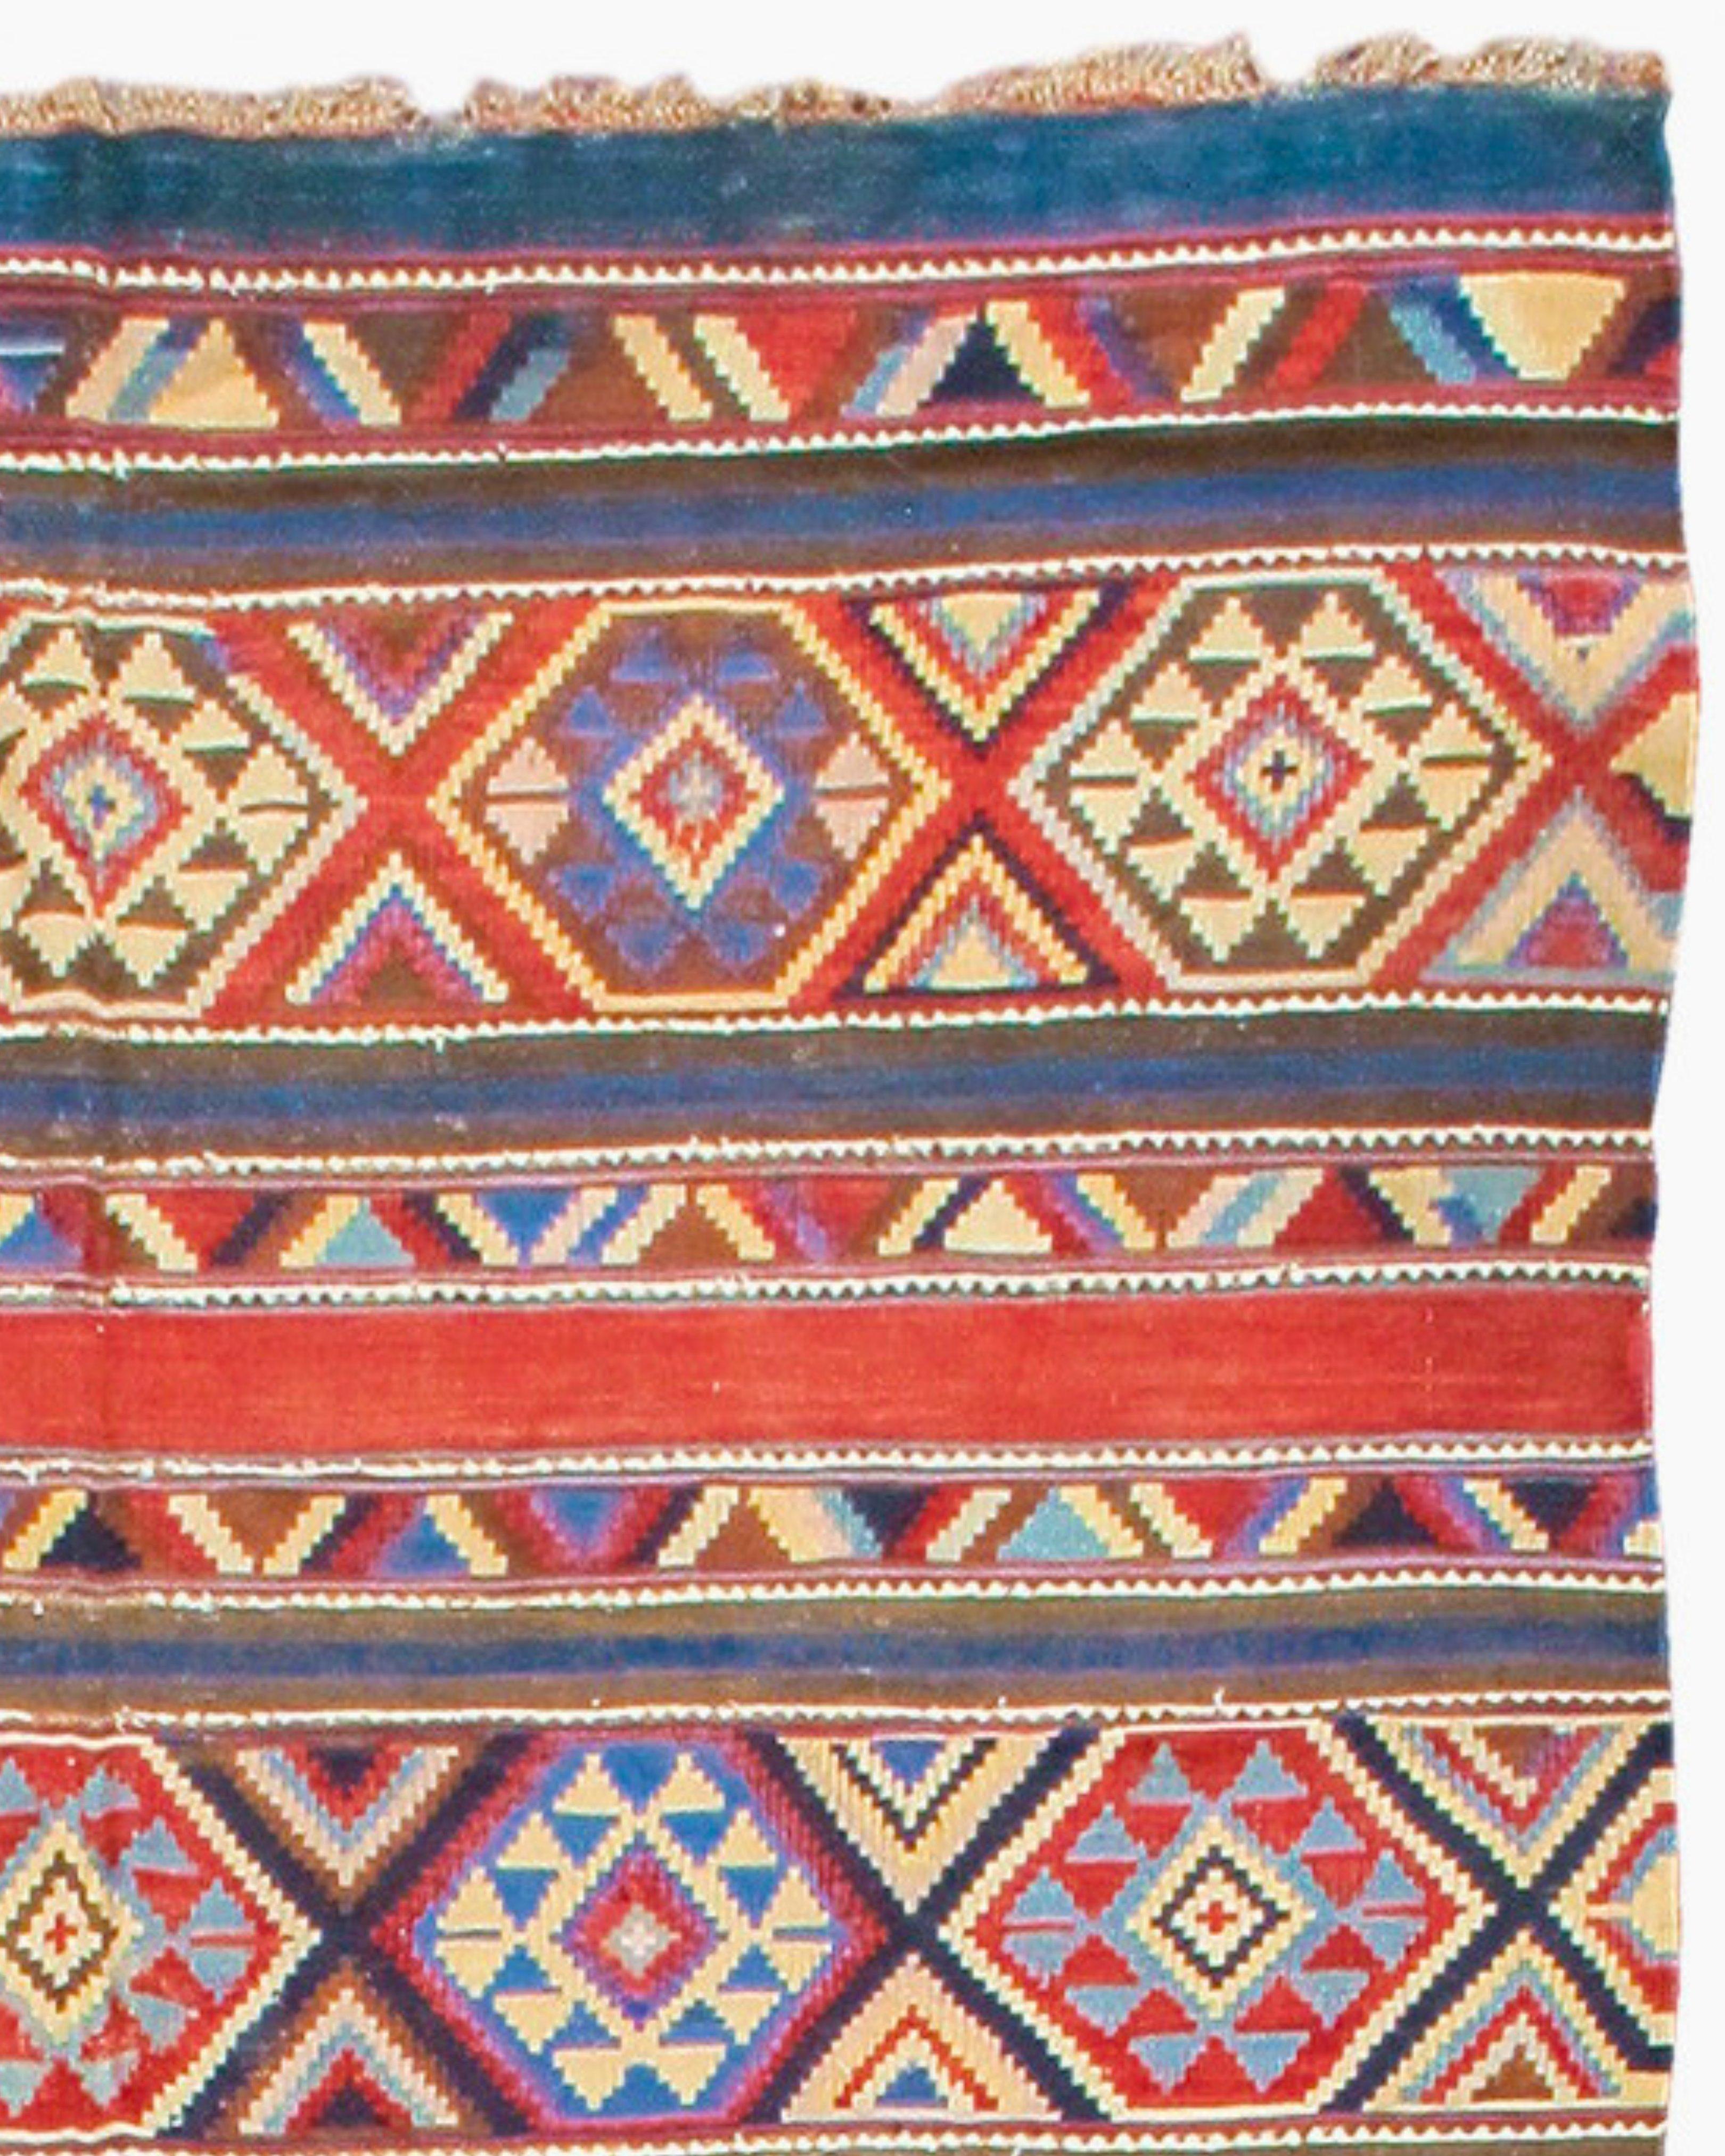 Antique Shirvan Kilim Rug, Late 19th Century

Additional Information:
Dimensions: 5'0